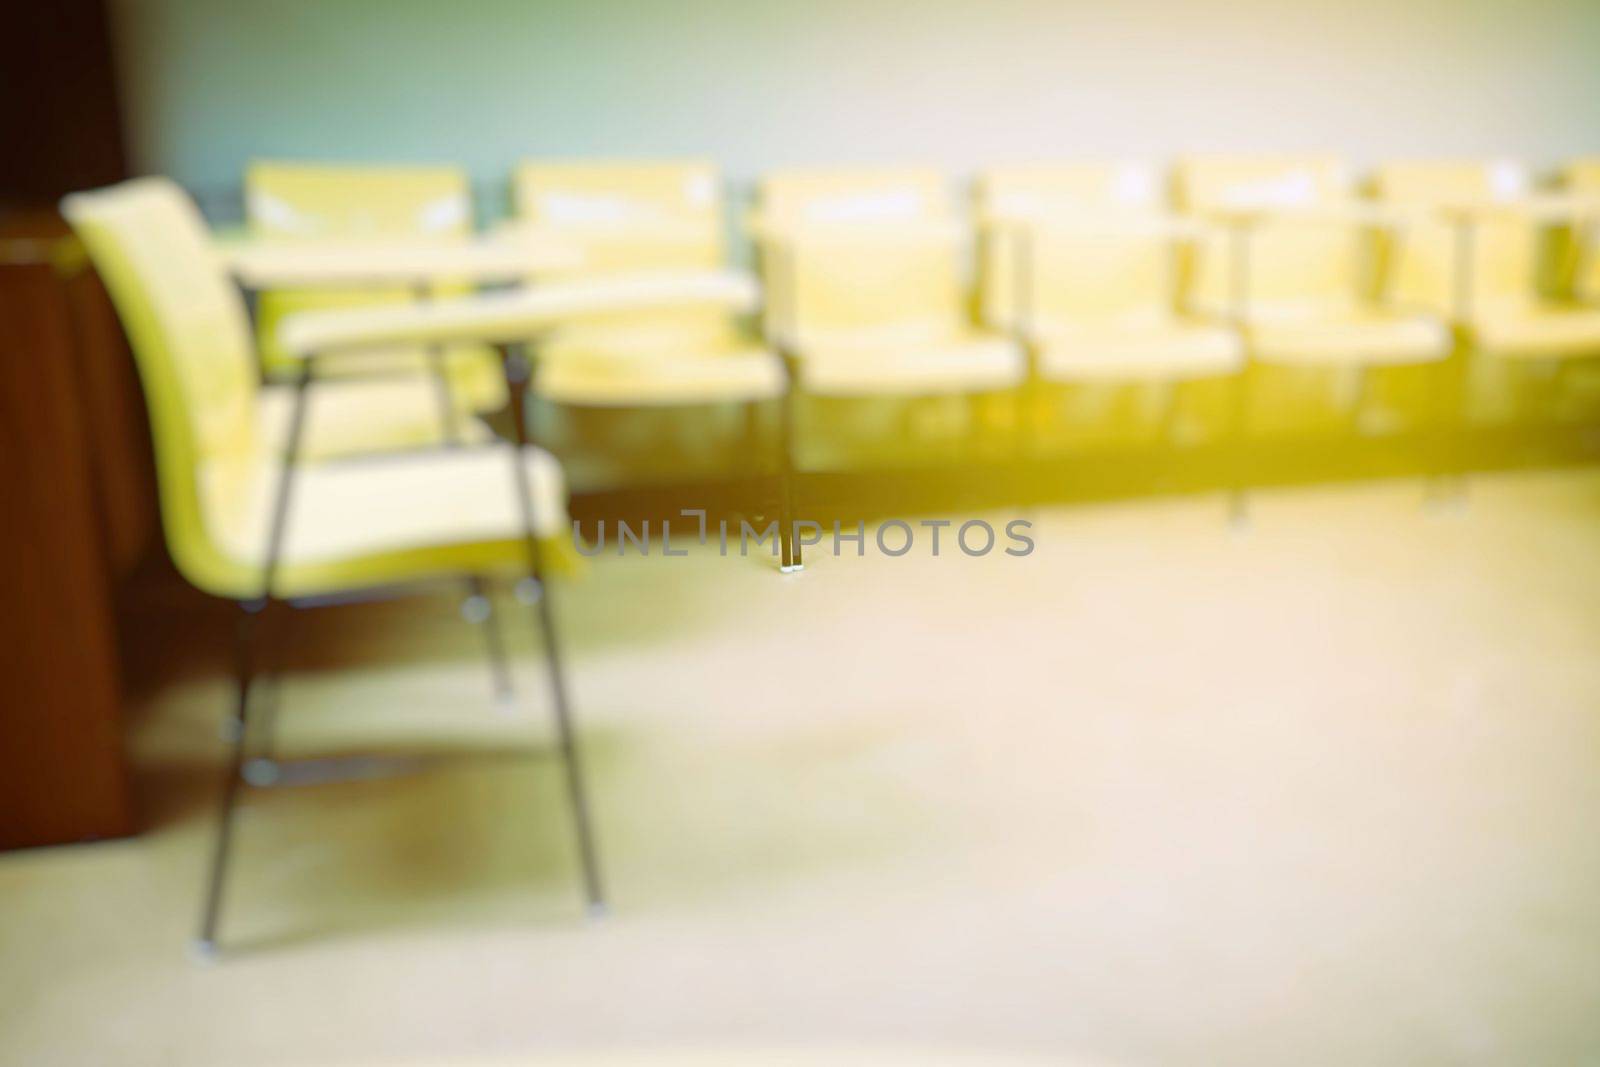 Blurred Lecture Chairs in Classroom with Light Leak Background. by mesamong